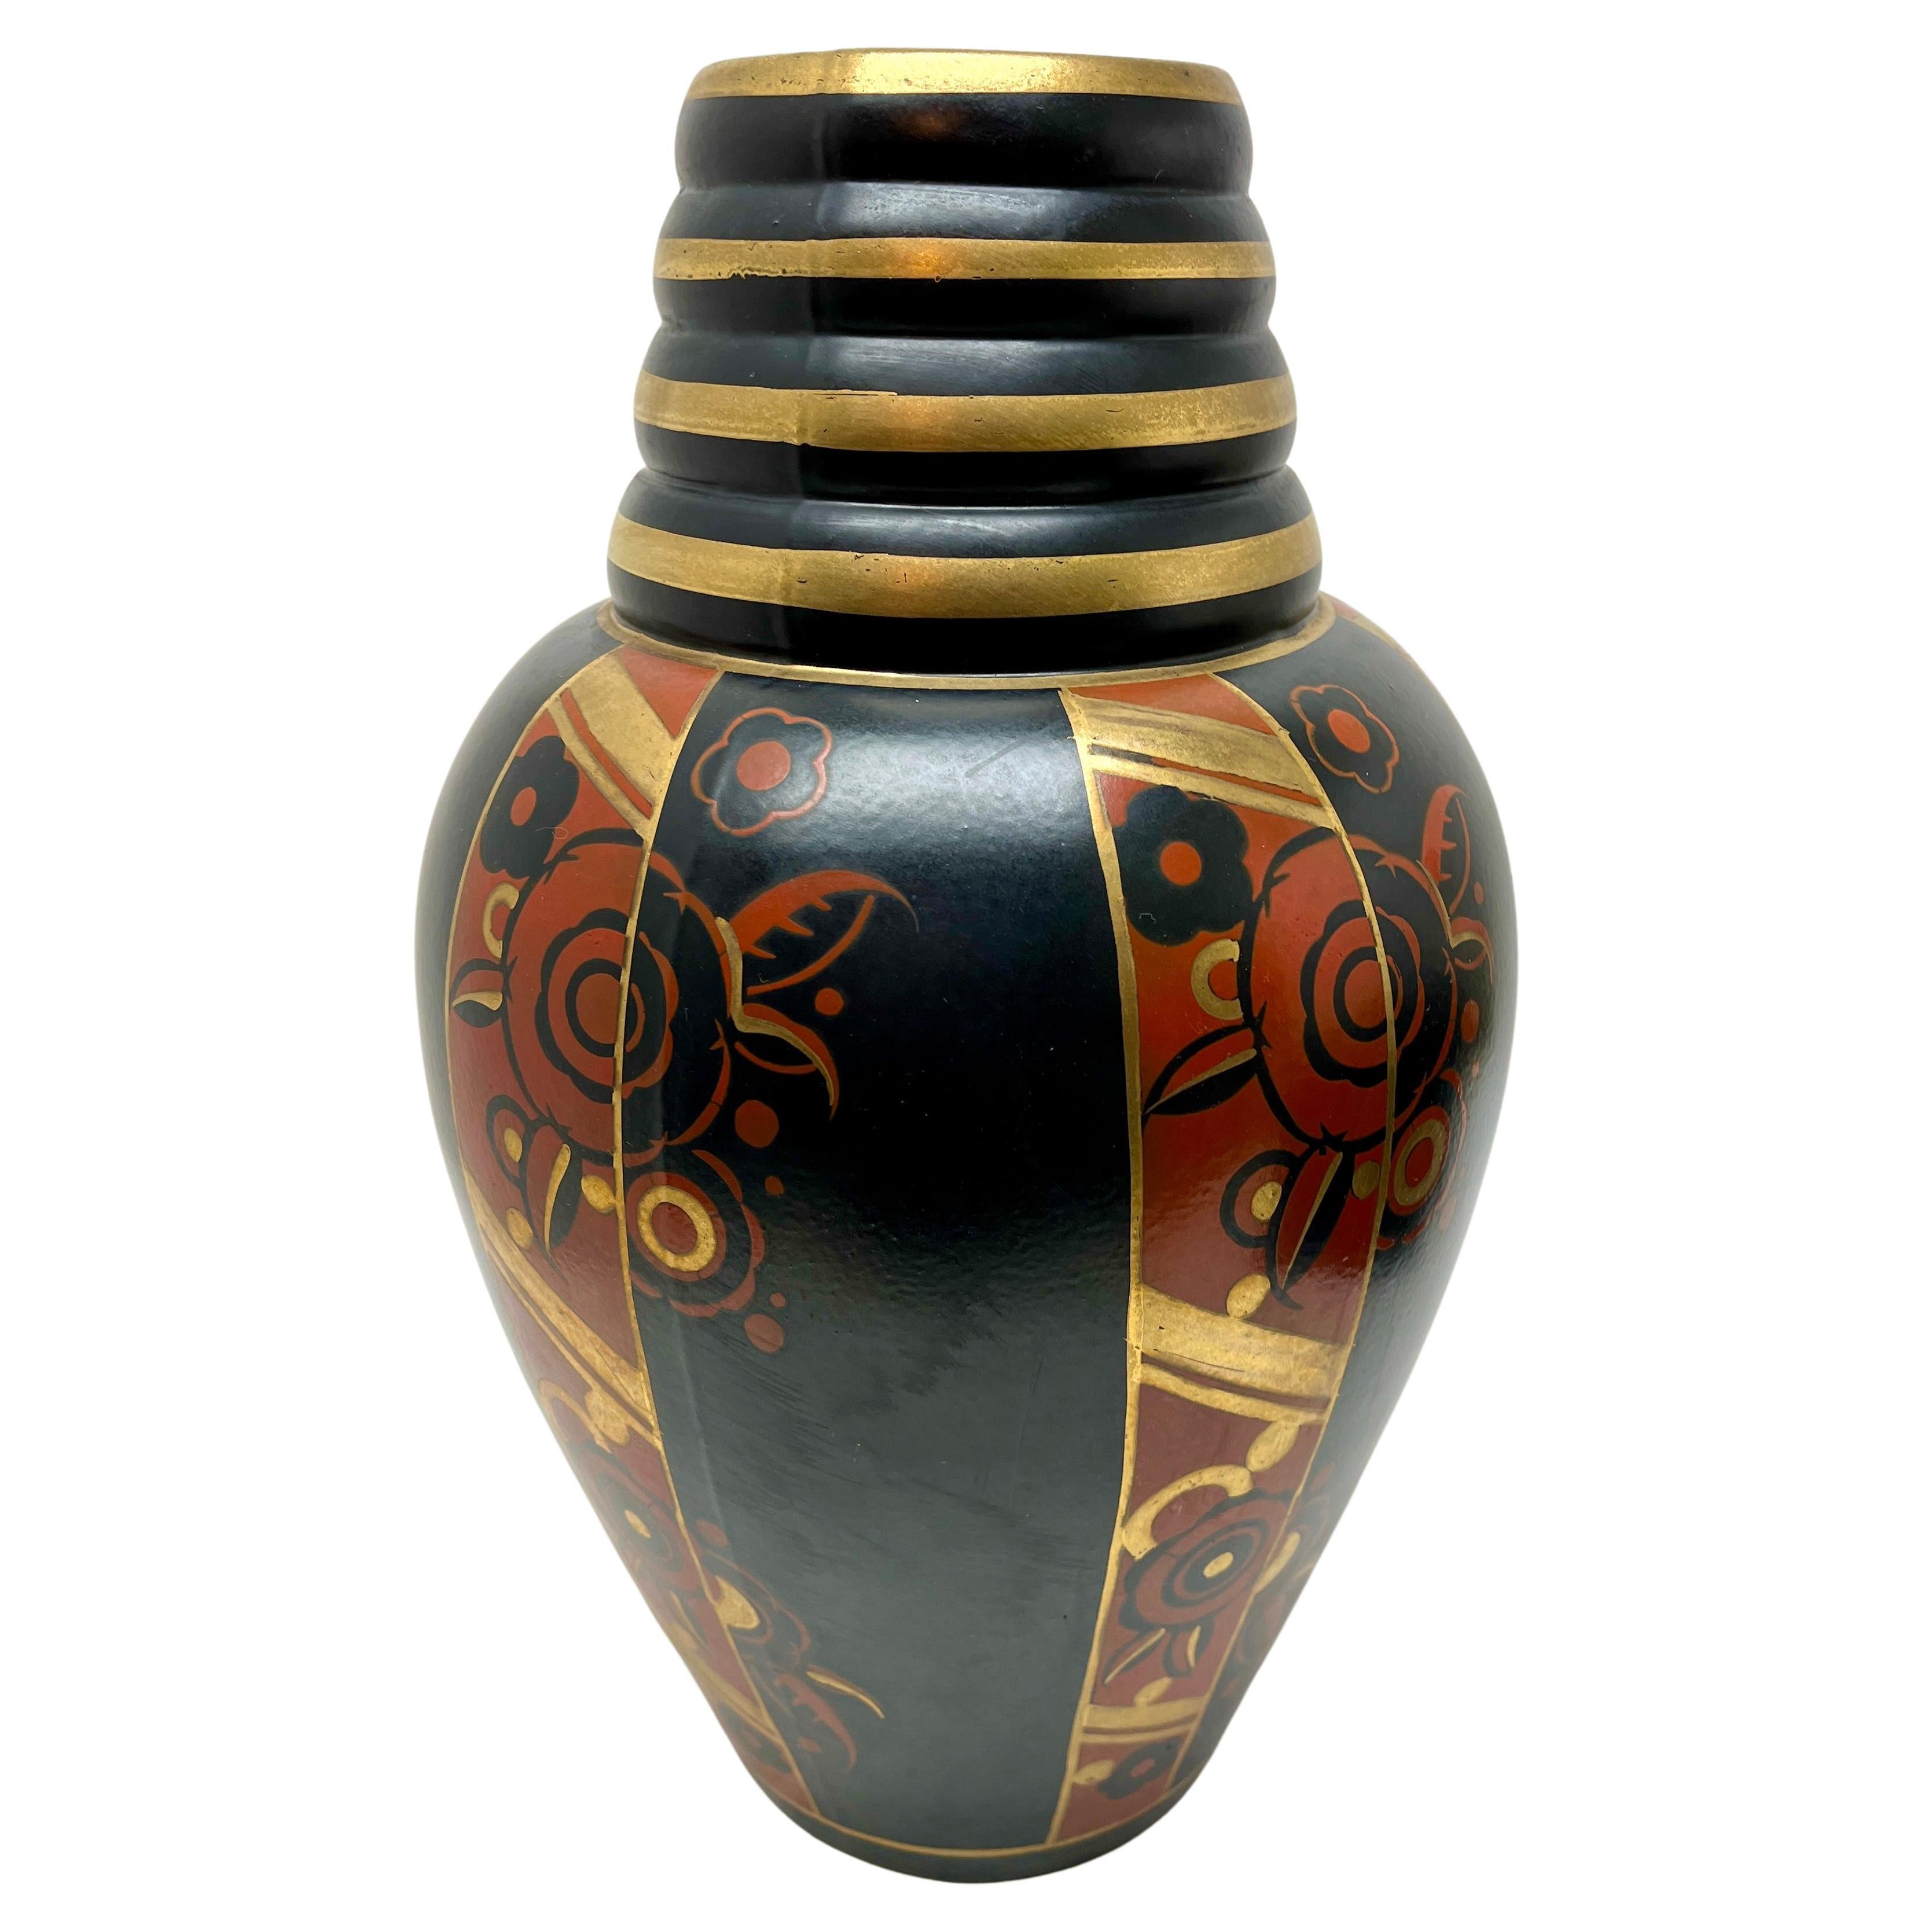 Famous rare Emile Lombard vase for Ghislain Belgium and a typical beautiful example of the art deco period and dates from circa 1930

Earthenware -Faiencerie de Saint Ghislain, Belgium -Height 35 cm -Width 22 cm -Black background, copper neck,